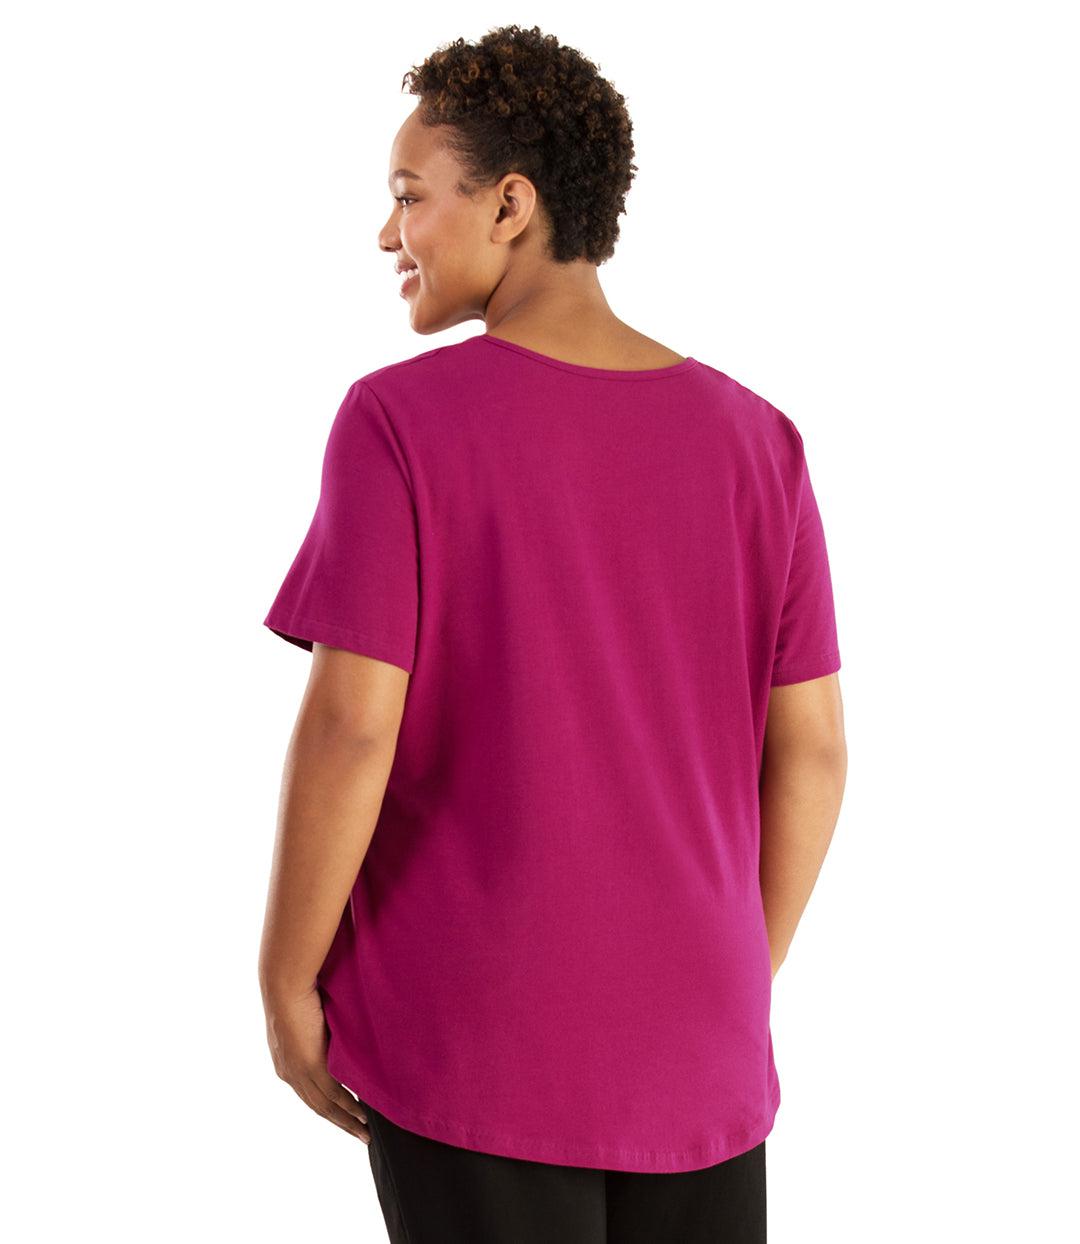 Plus size woman, facing back looking left, wearing JunoActive plus size Stretch Naturals Lite Pocket Tee in the color Magenta. Her right hand is in the shirt pocket by her hip, her left arm is naturally at her side. She is wearing JunoActive Plus Size Leggings in the color Black.